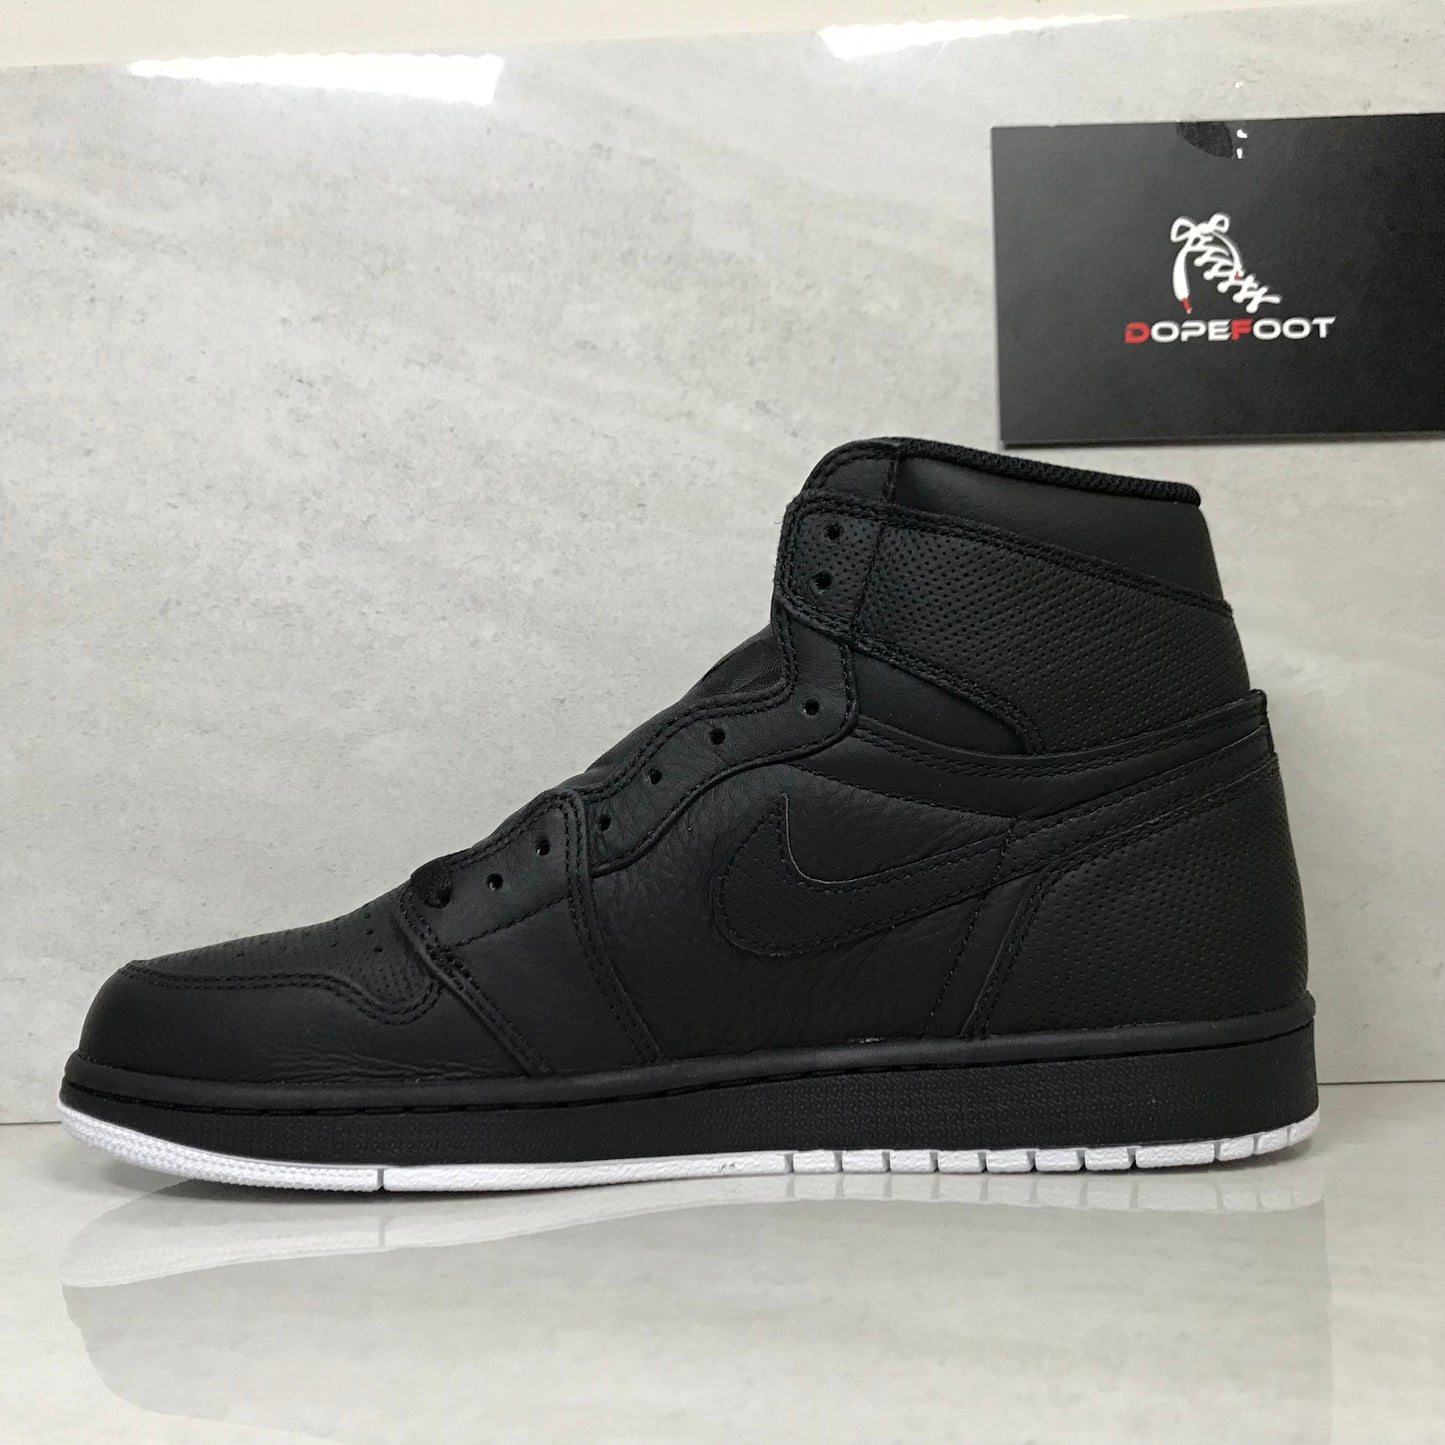 DS Air Jordan 1 I High OG Black/White Perforated Size 7/Size 9/9.5/Size 10/10.5/Size 11/Size 16